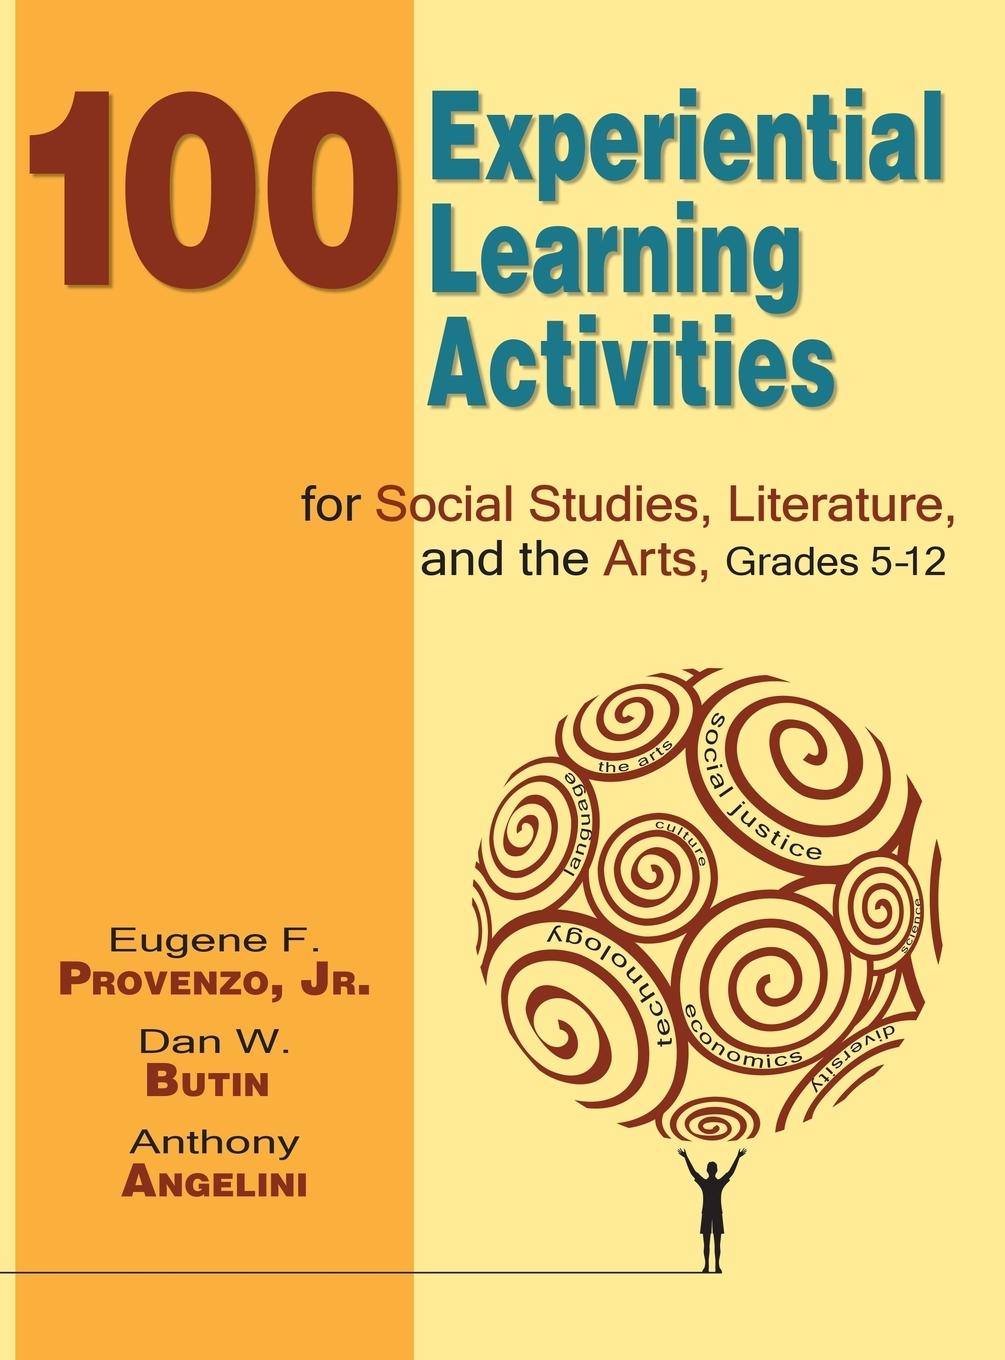 100 Experiential Learning Activities for Social Studies, Literature, and the Arts, Grades 5-12 - Provenzo, Eugene F.|Butin, Dan W.|Angelini, Anthony